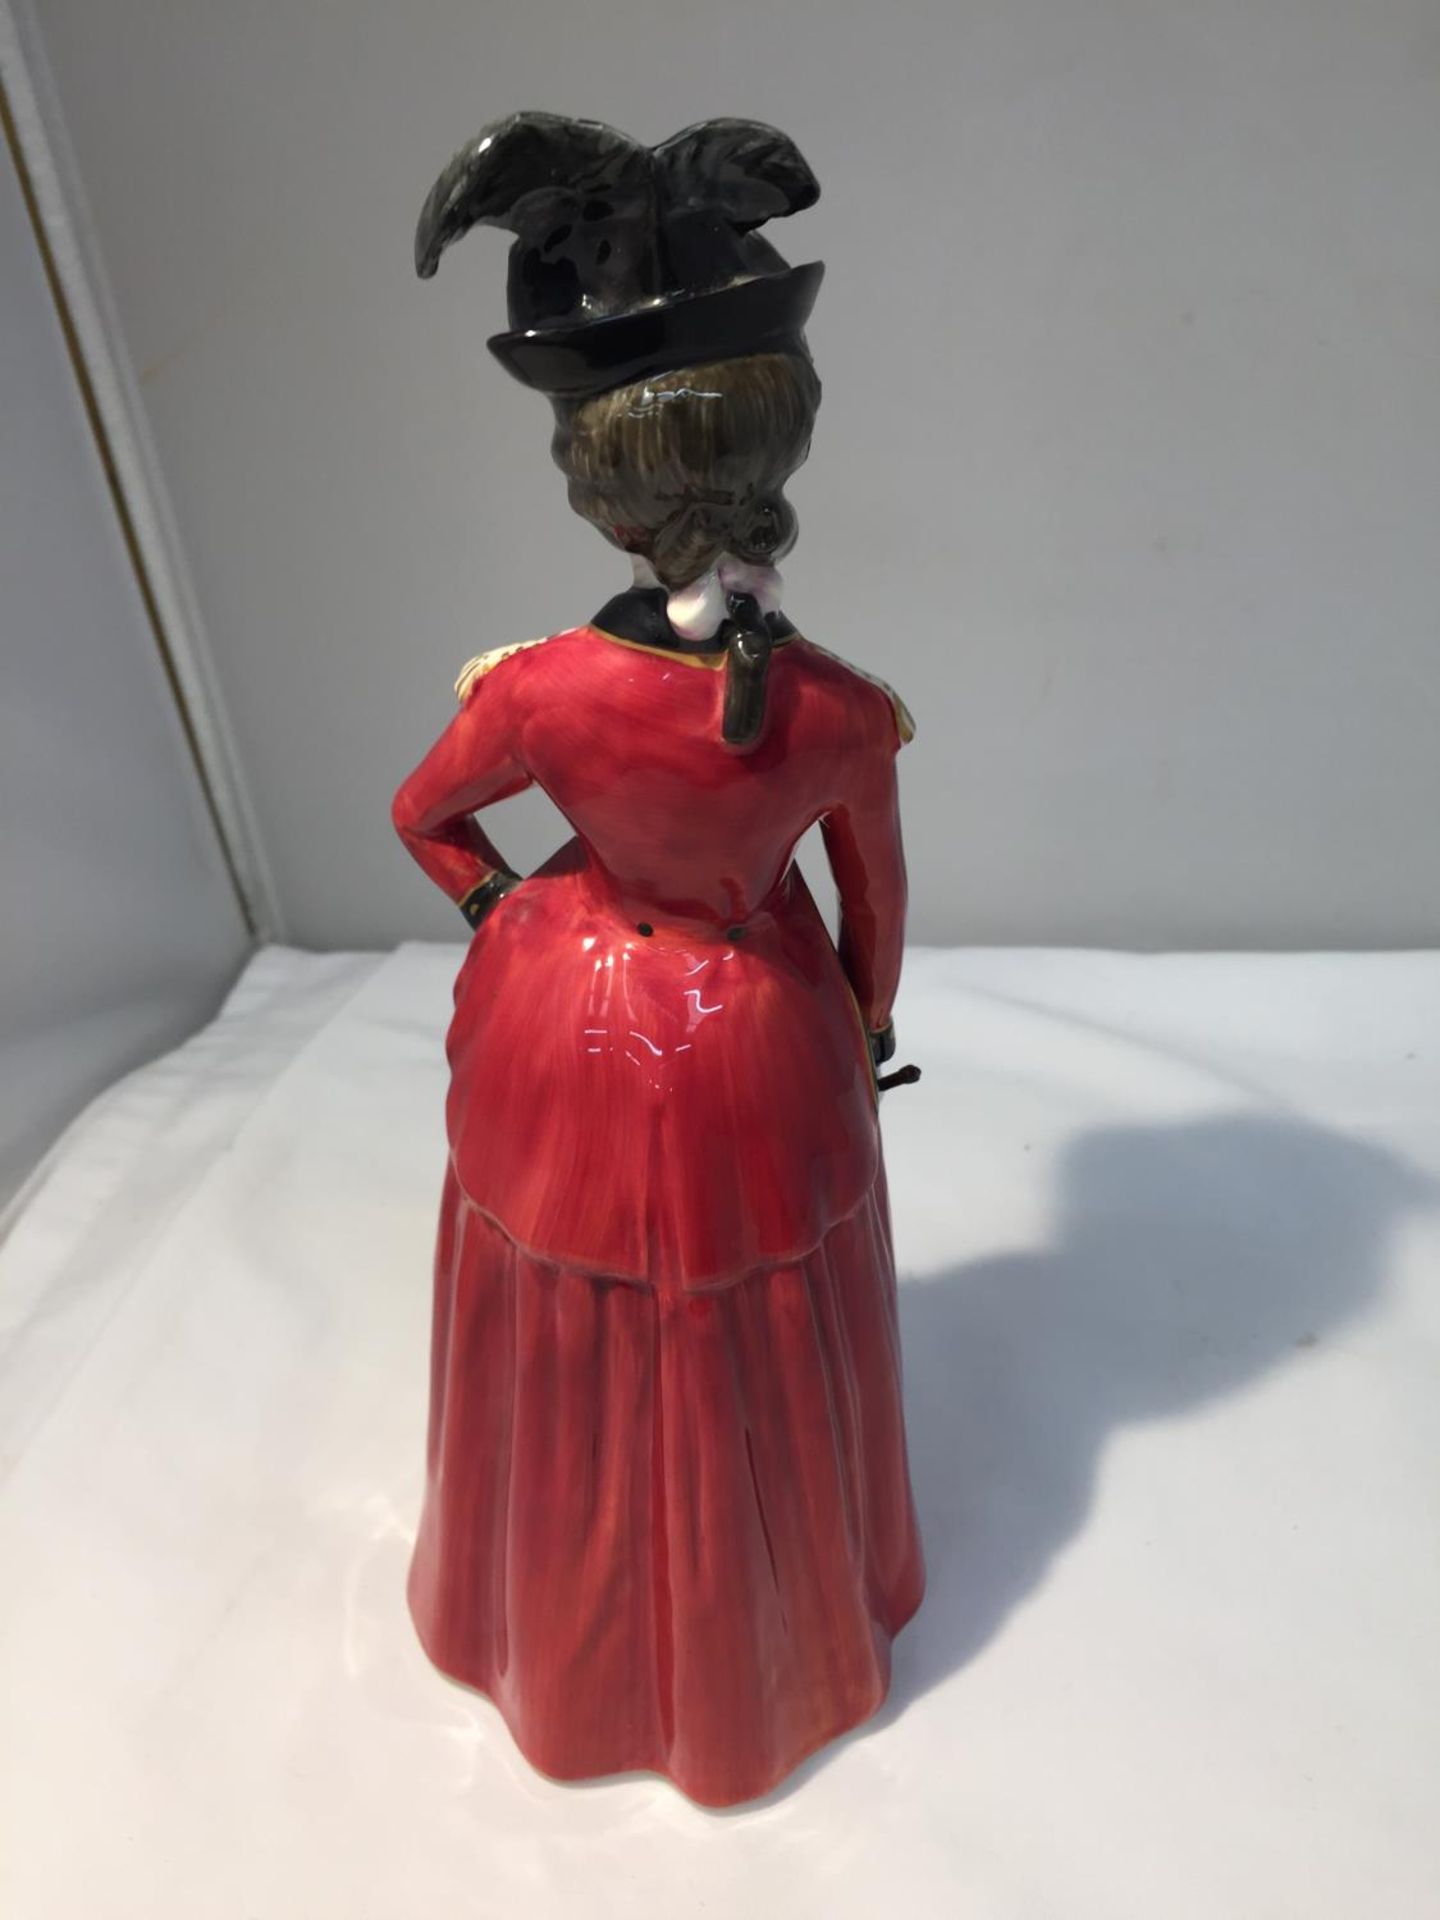 A ROYAL DOULTON FIGURE 'LADY WORSLEY' HN 3318, FROM A COLLECTION OF FOUR FIGURES, LIMITED EDITION - Image 4 of 7